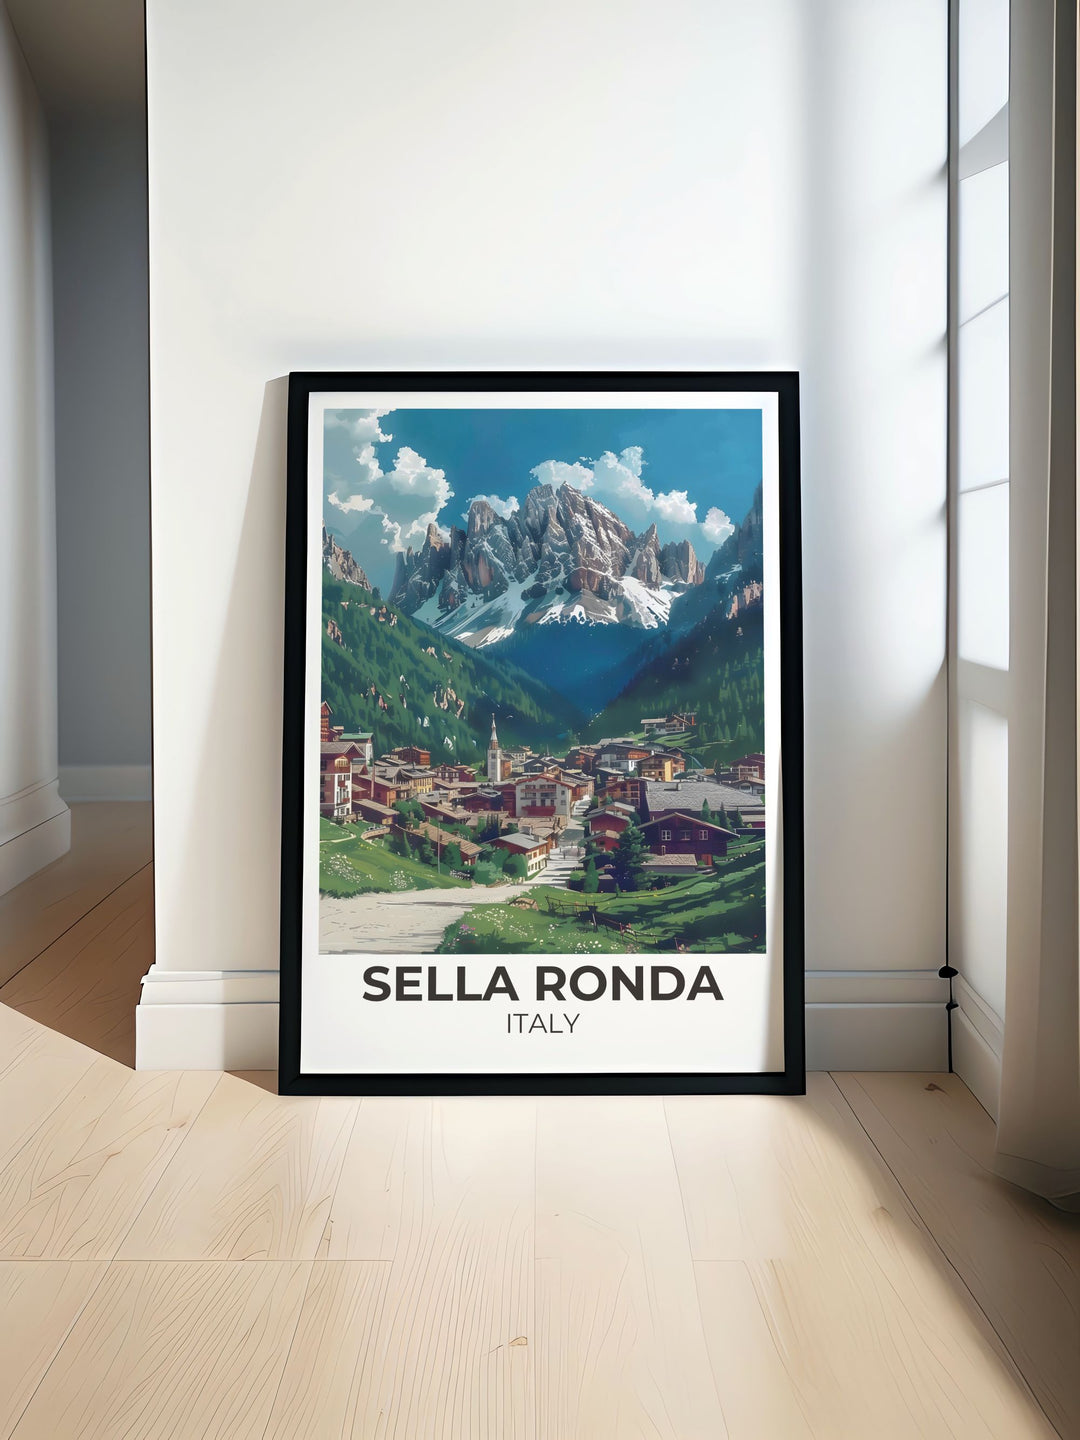 Sella Ronda Ski Circuit Fine Art Prints capturing the thrilling slopes and stunning landscapes of the Italian Dolomites, perfect for adding adventure to your home decor.